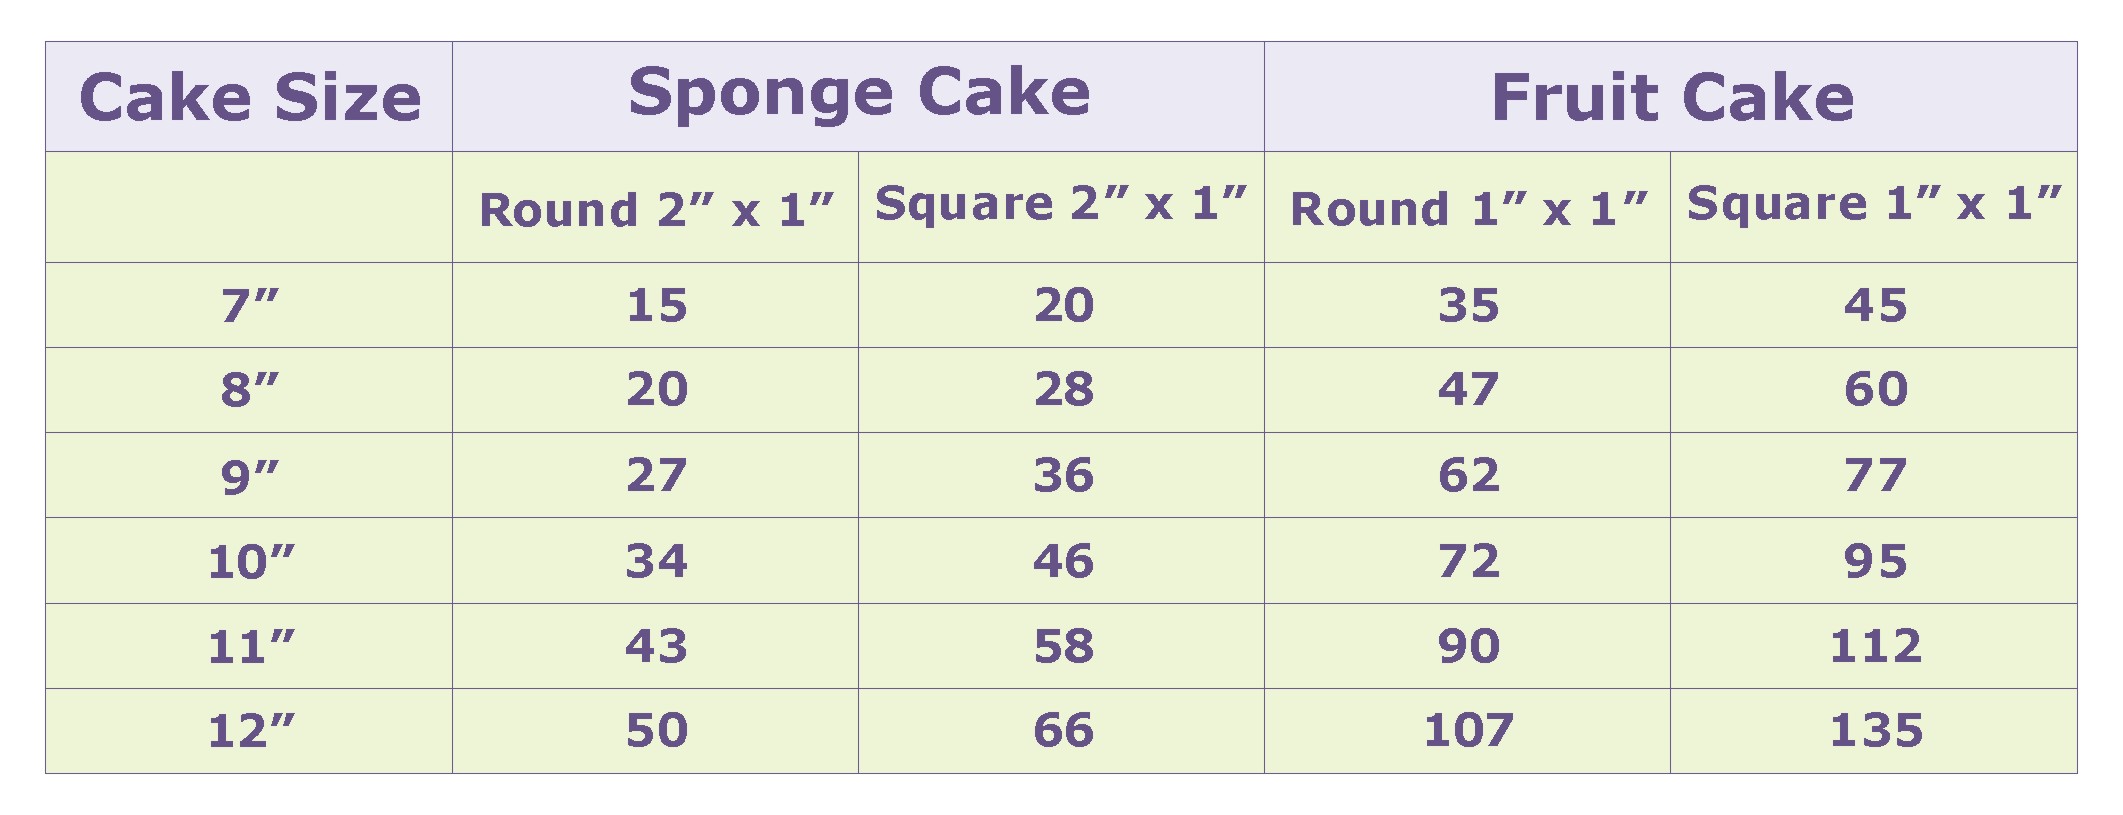 Lavender cake size and portions